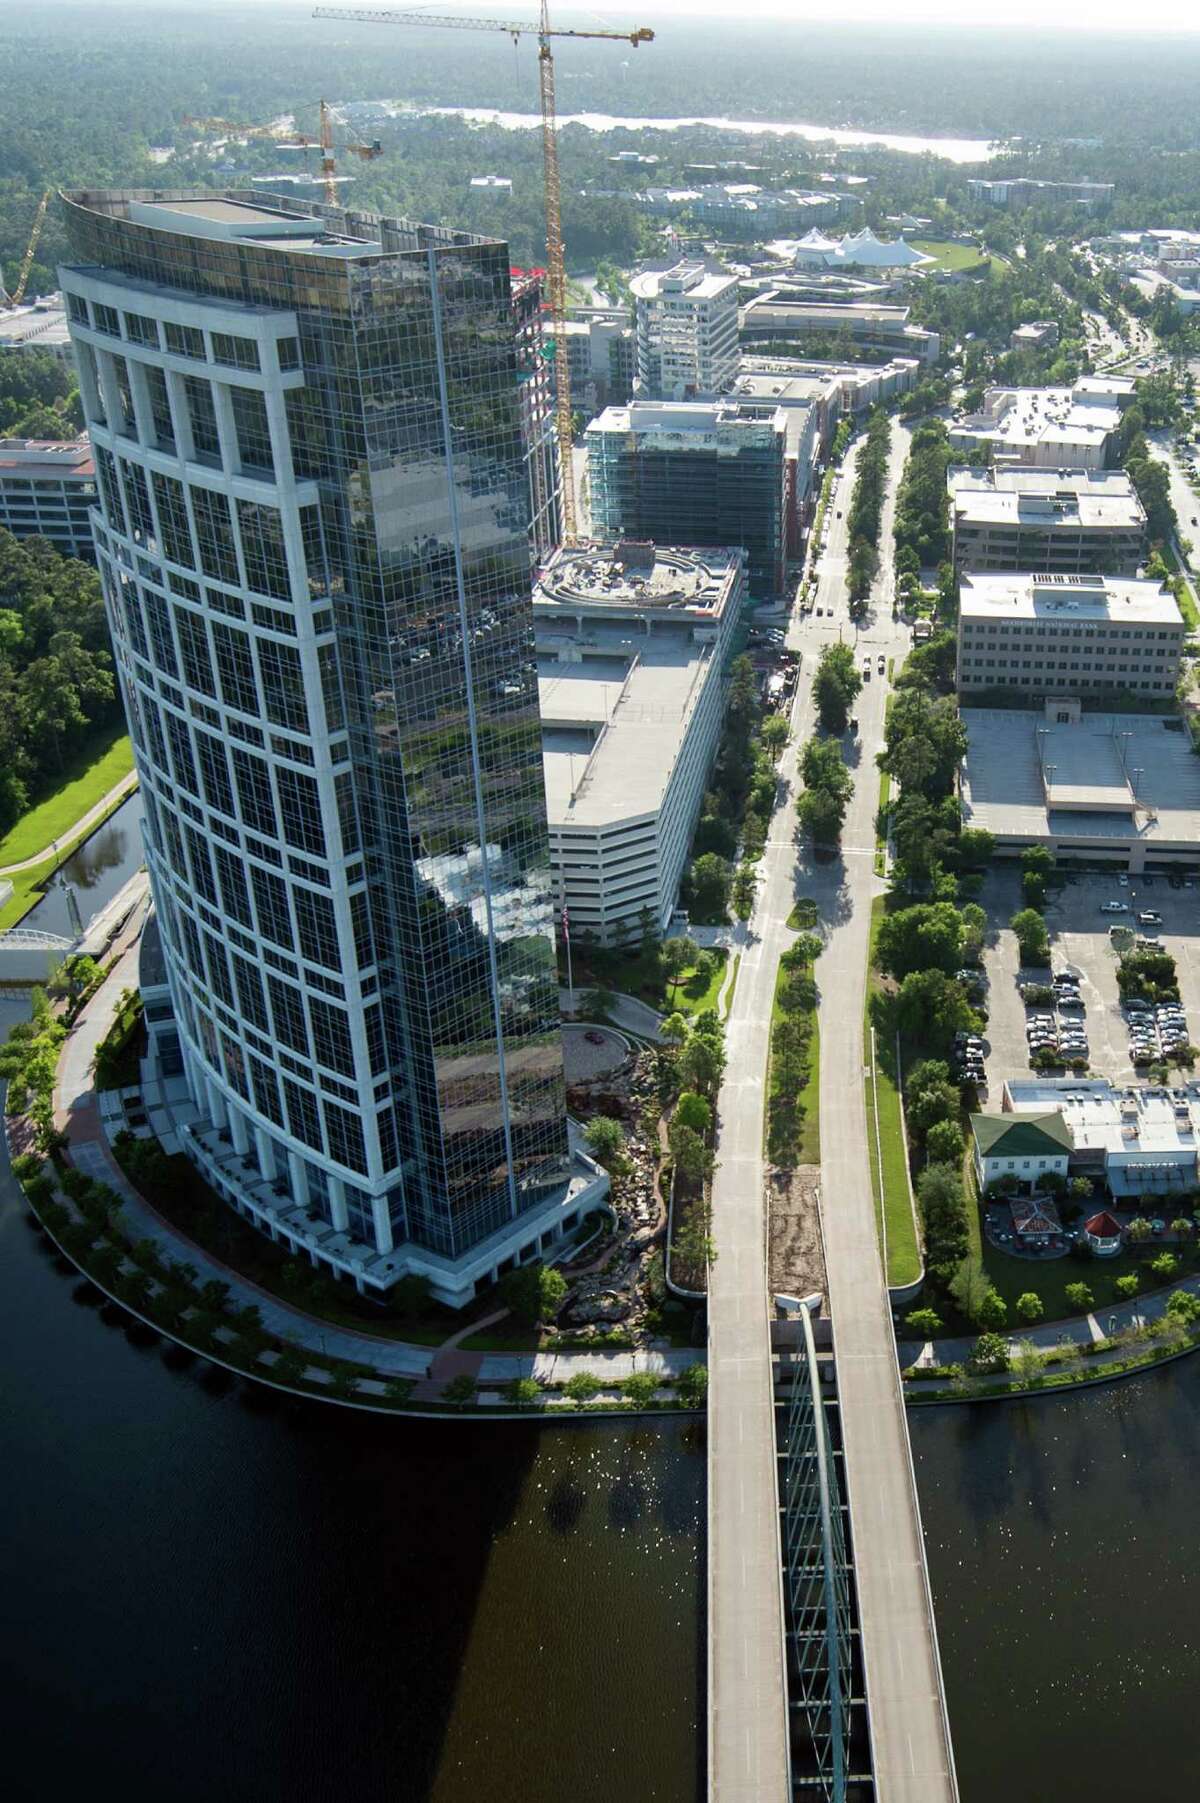 With developments such as the Anadarko Tower, above, and Exxon-Mobil's new campus, The Woodlands is maturing into a big city, with all the problems that accompany growth.